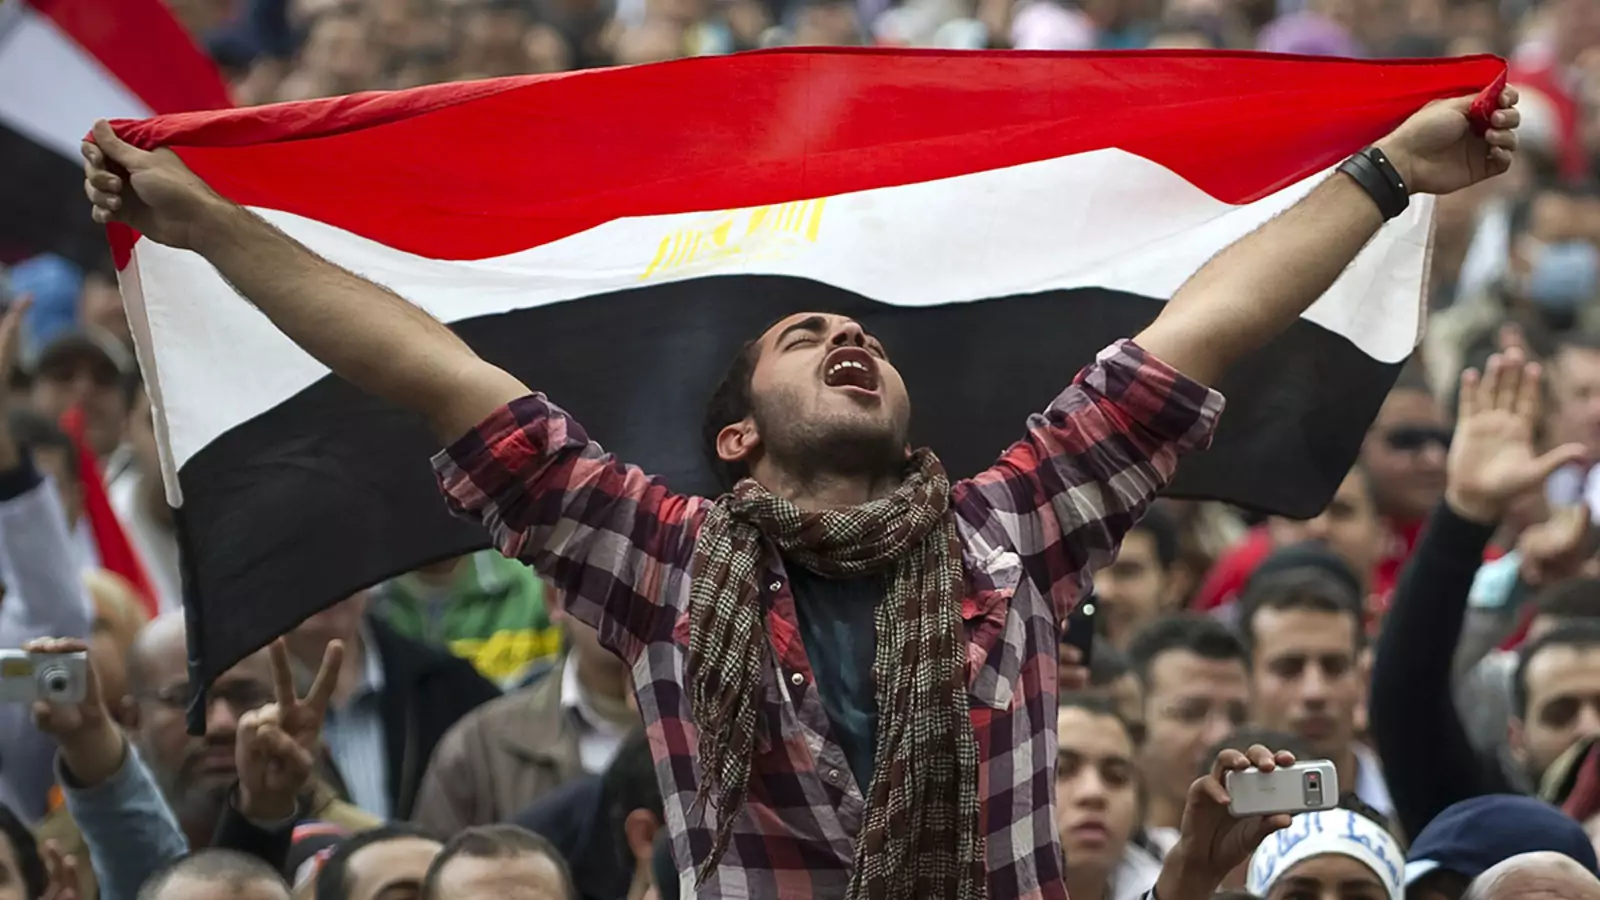 An Egyptian protester holds his national flag as he shouts slogans against President Hosni Mubarak at Cairo’s Tahrir Square in 2011.